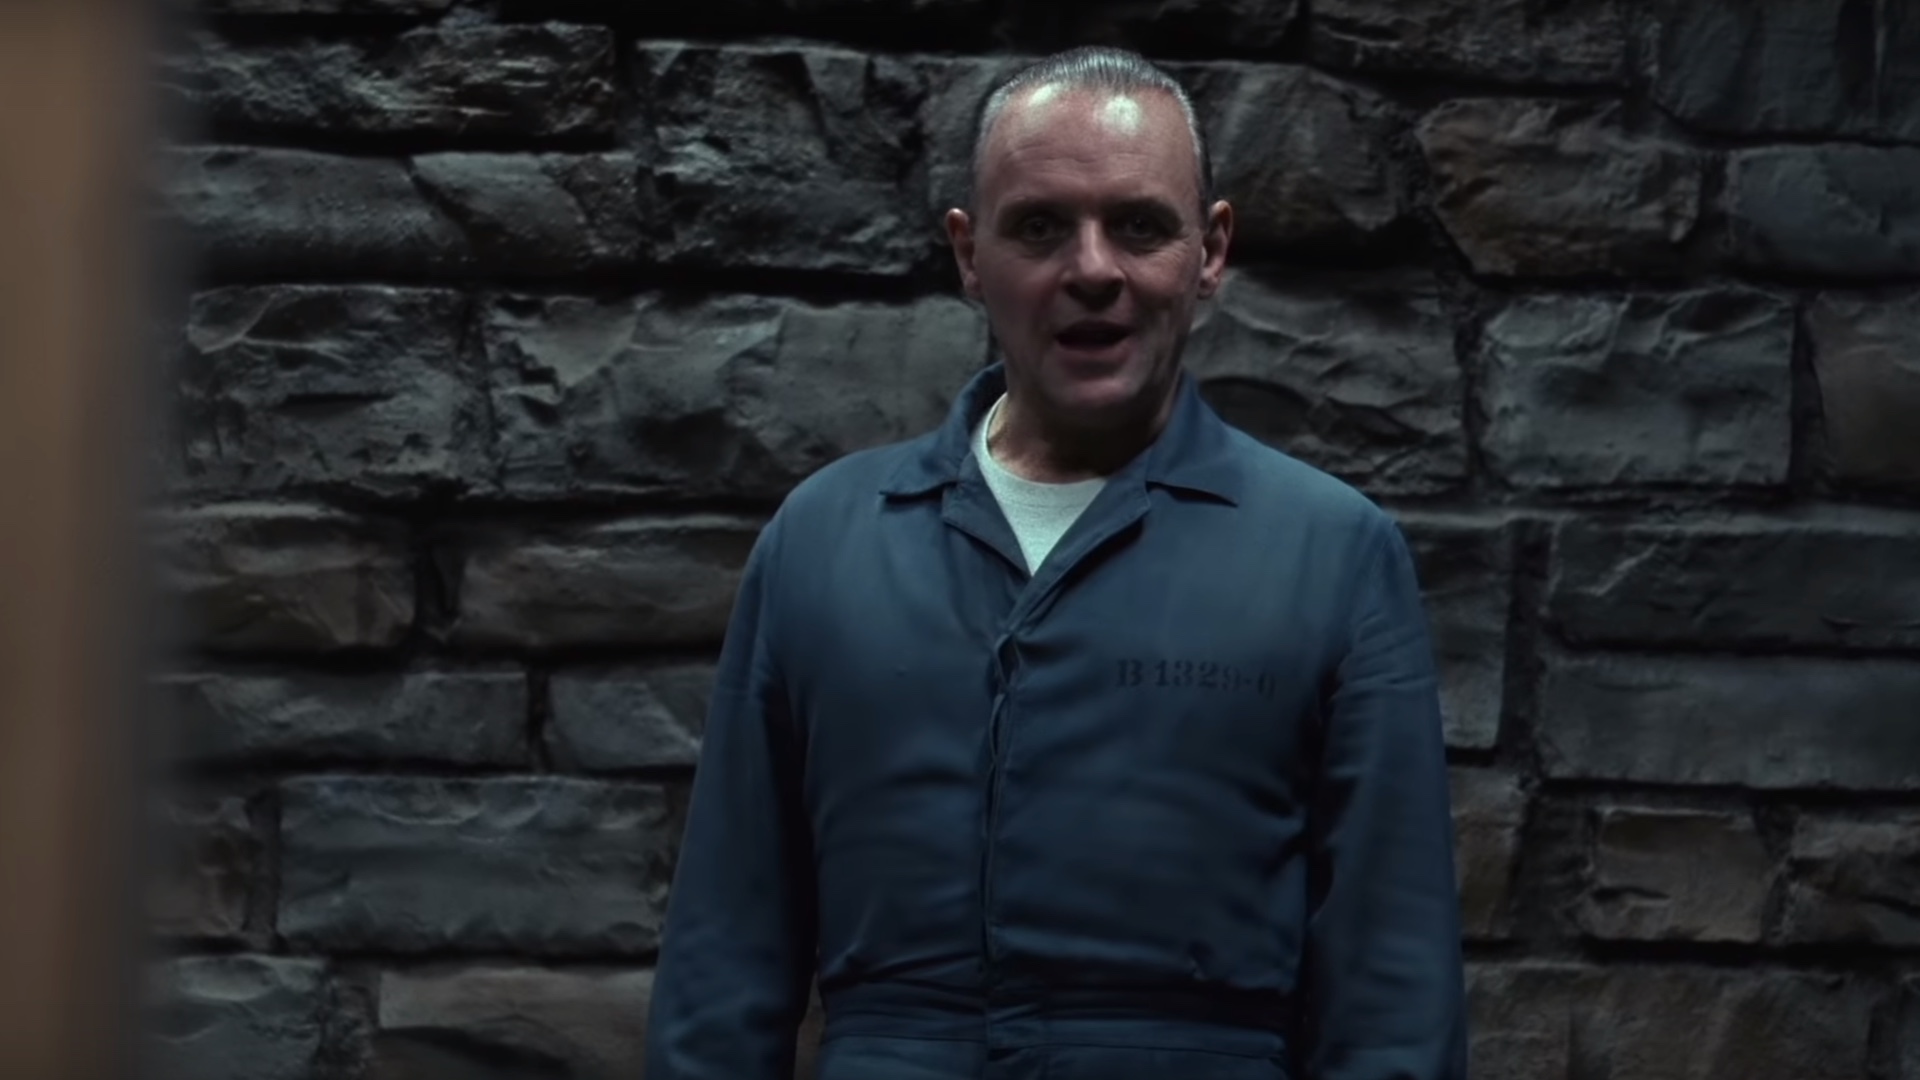 Fascinating SILENCE OF THE LAMBS Scene Dissection Shows How The Characters ...